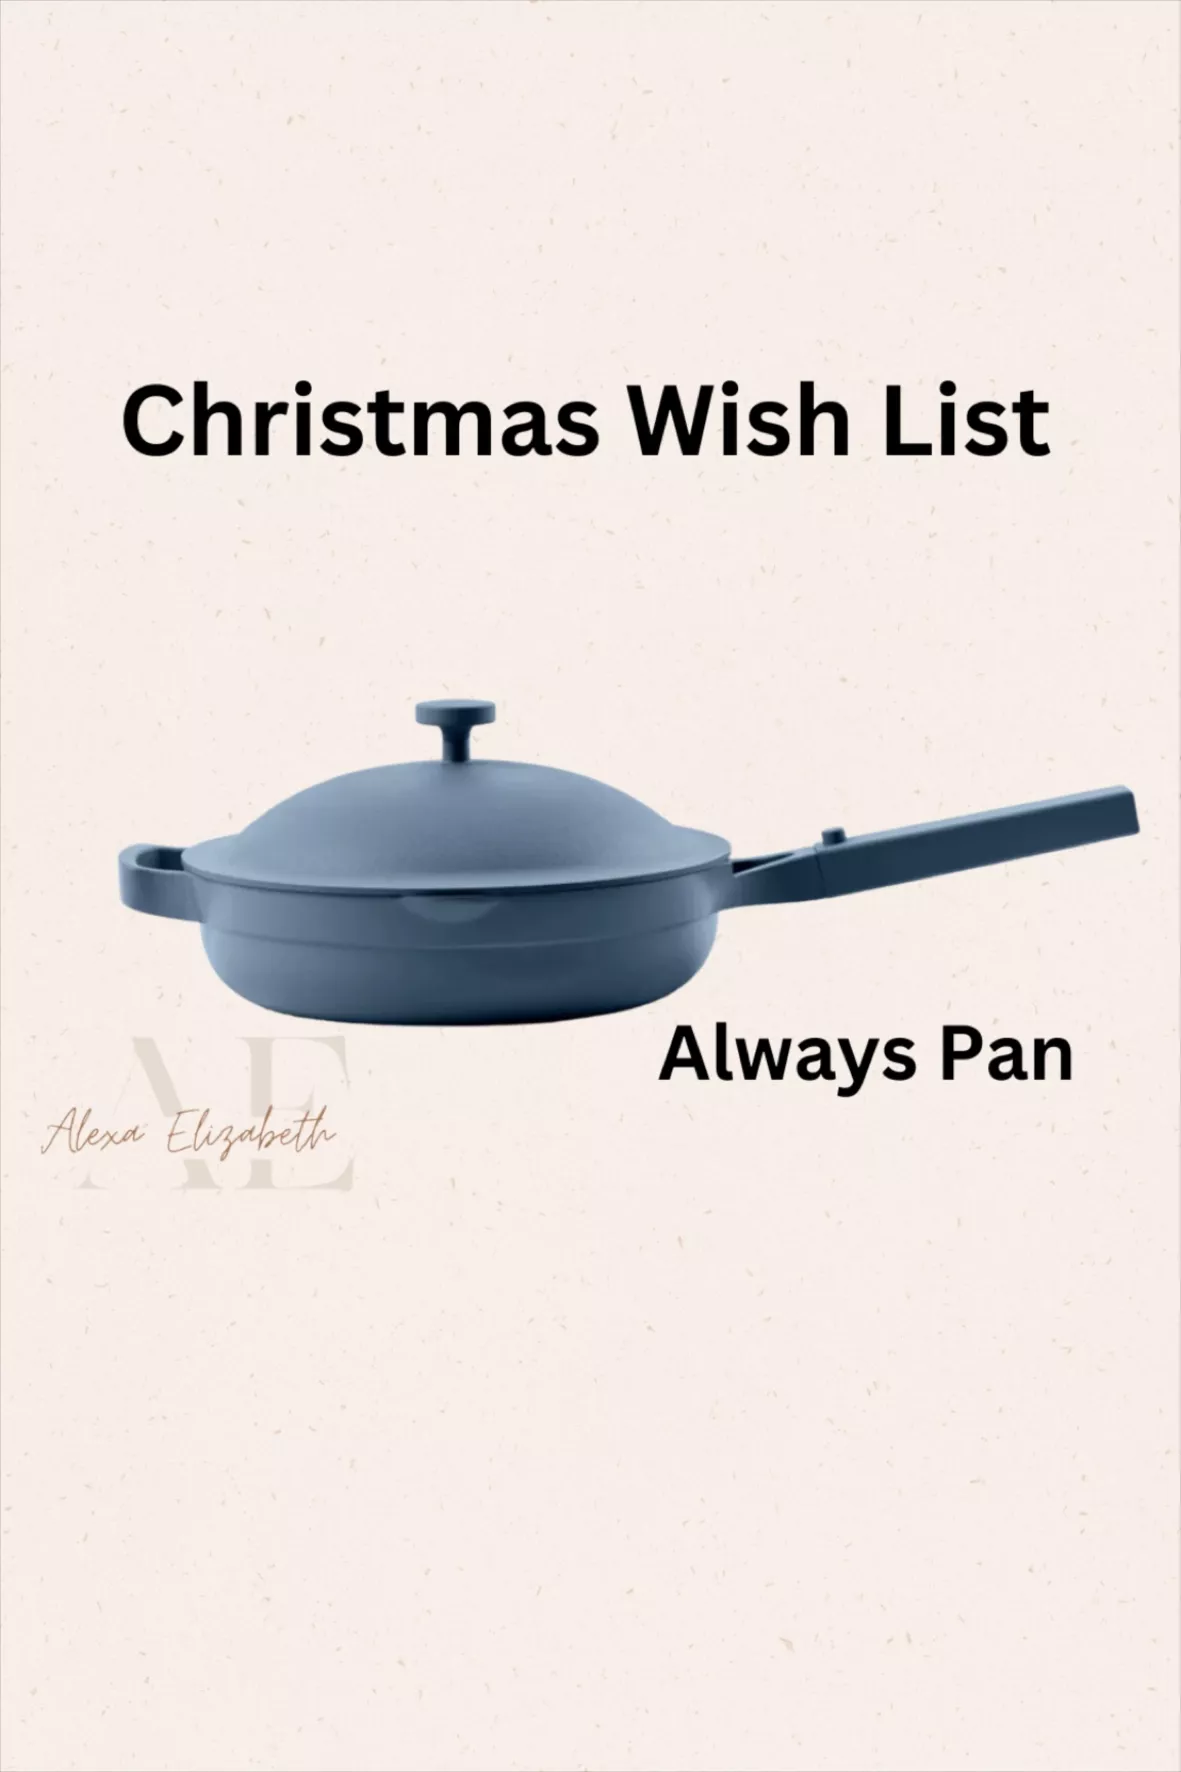 Cast Iron Always Pan curated on LTK